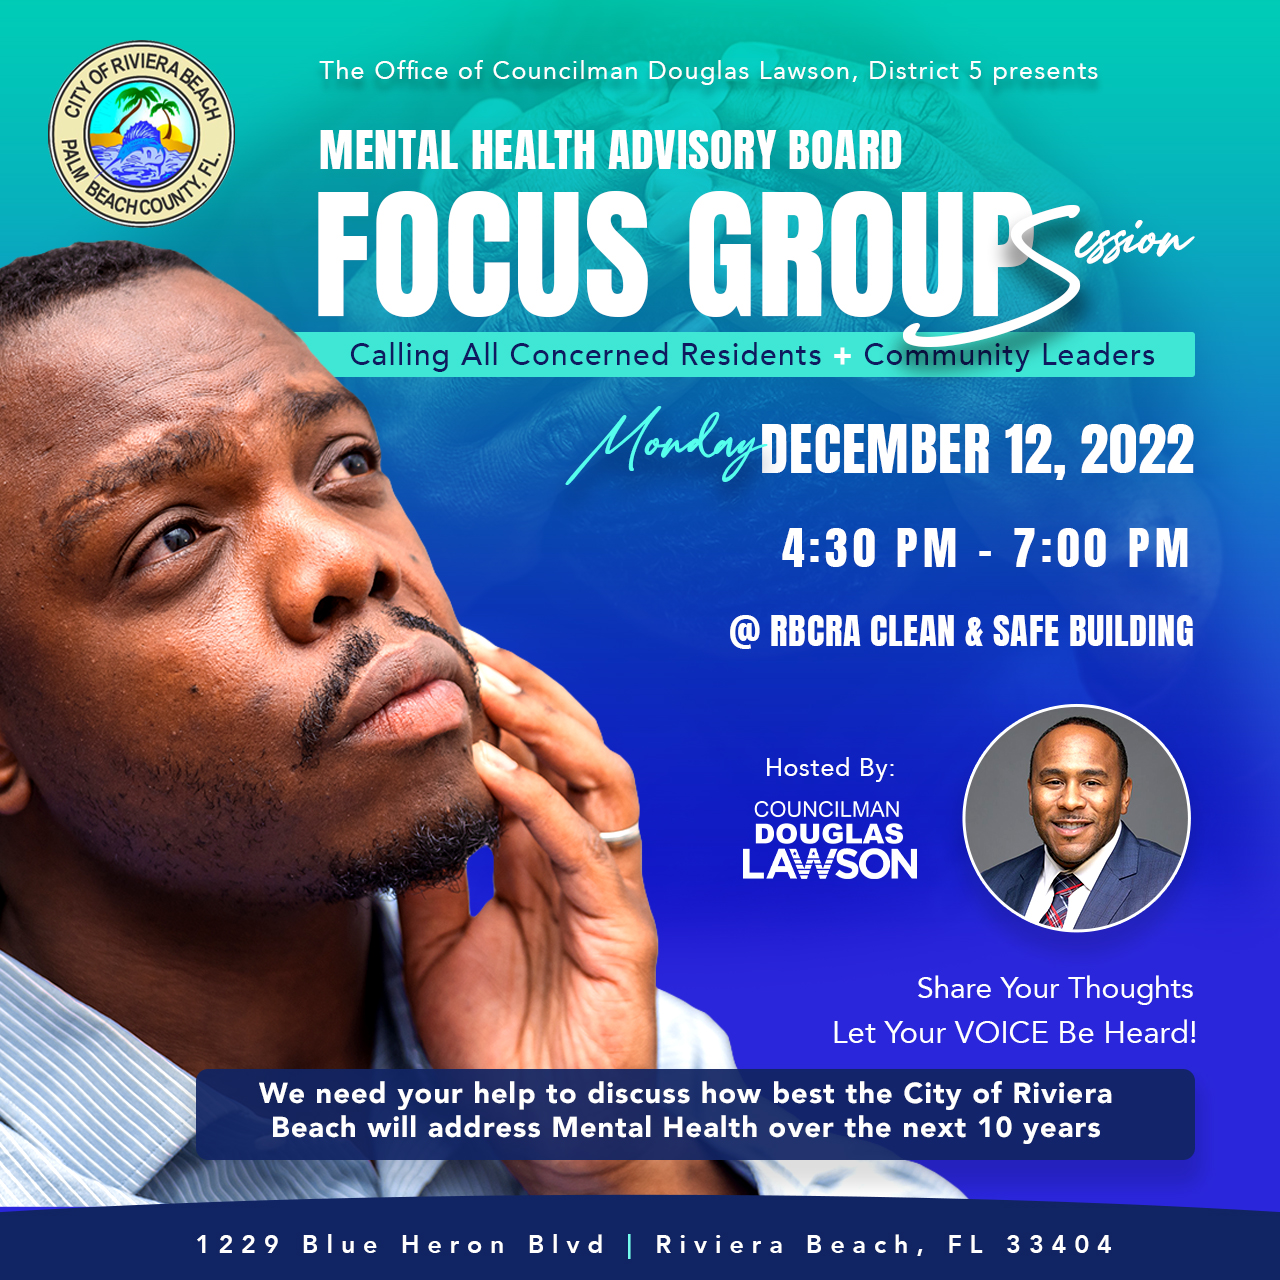 MENTAL HEALTH ADVISORY BOARD FOCUS GROUPS. Calling All Concerned Residents + Community Leaders Monley DEBEMBER 12, 2022 4:30 PM - 7:00 PM @ RBCRA CLEAN & SAFE BUILDING Hosted By: COUNCILMAN DOUGLAS LA SON Share Your Thoughts Let Your VOICE Be Heard! We need your help to discuss how best the City of Riviera Beach will address Mental Health over the next 10 years